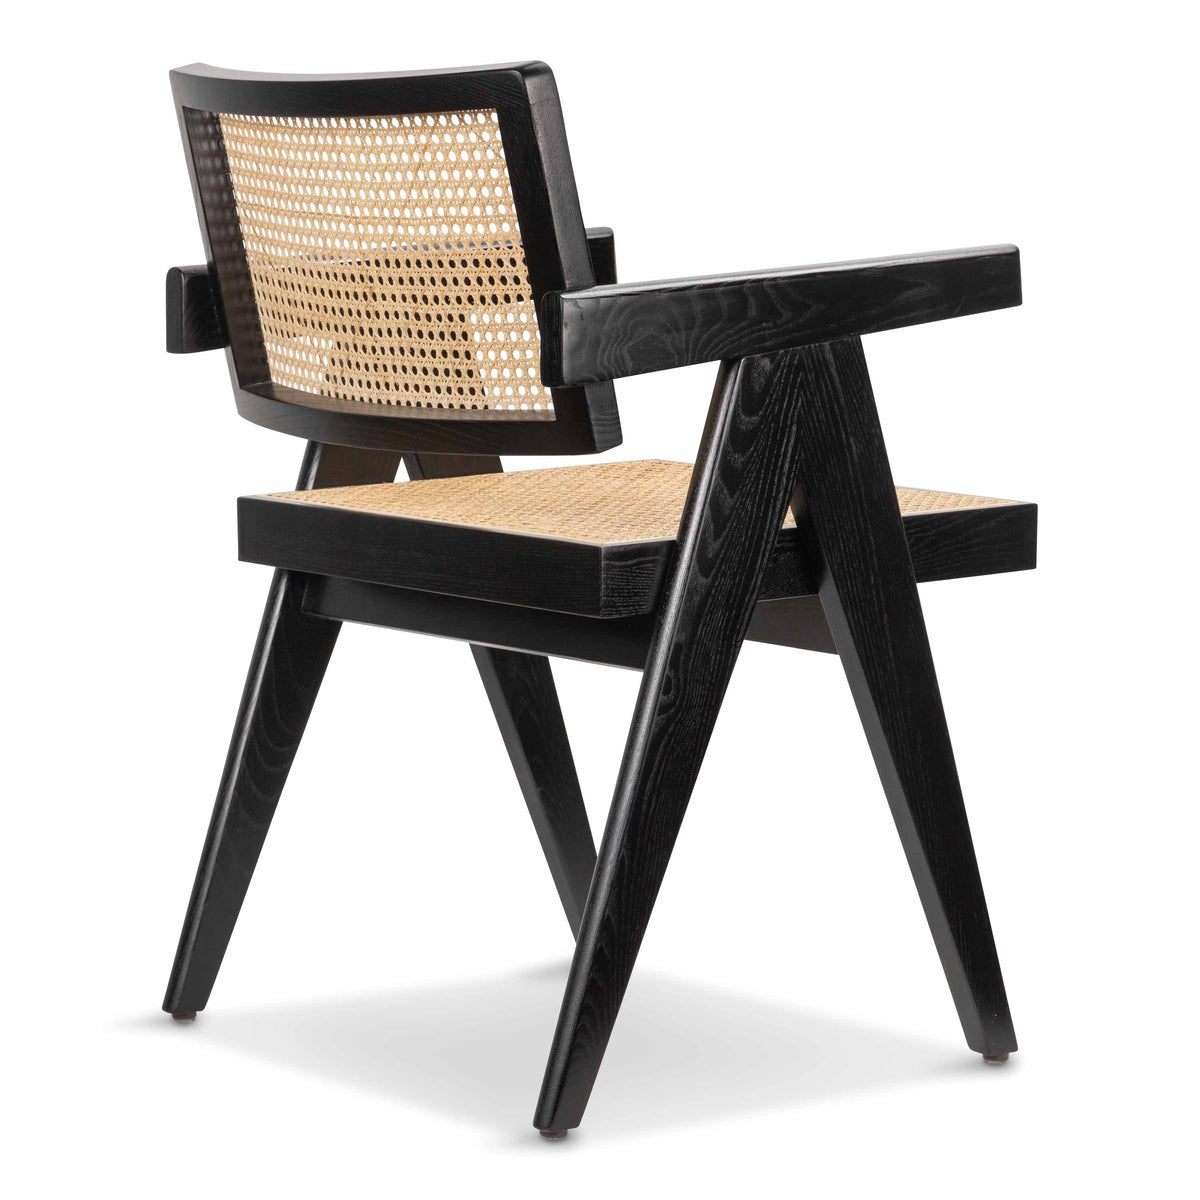 Mr. Cane Dining Chair